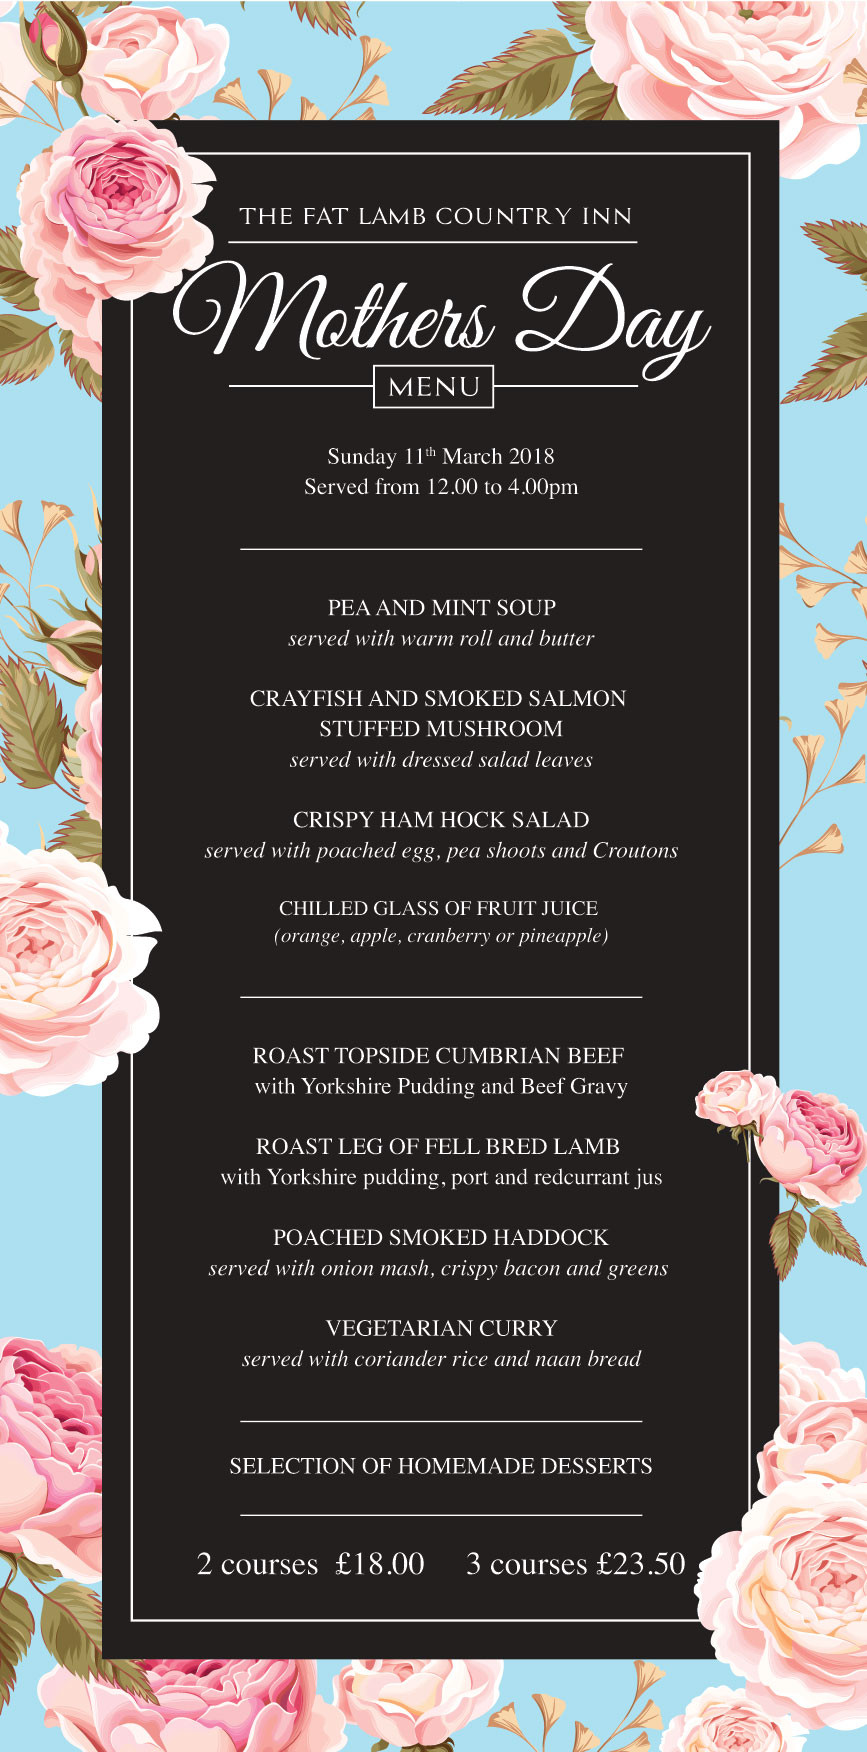 Mothers Day Dinner Menus
 Mothers Day at the Fat Lamb afternoon tea and mother s